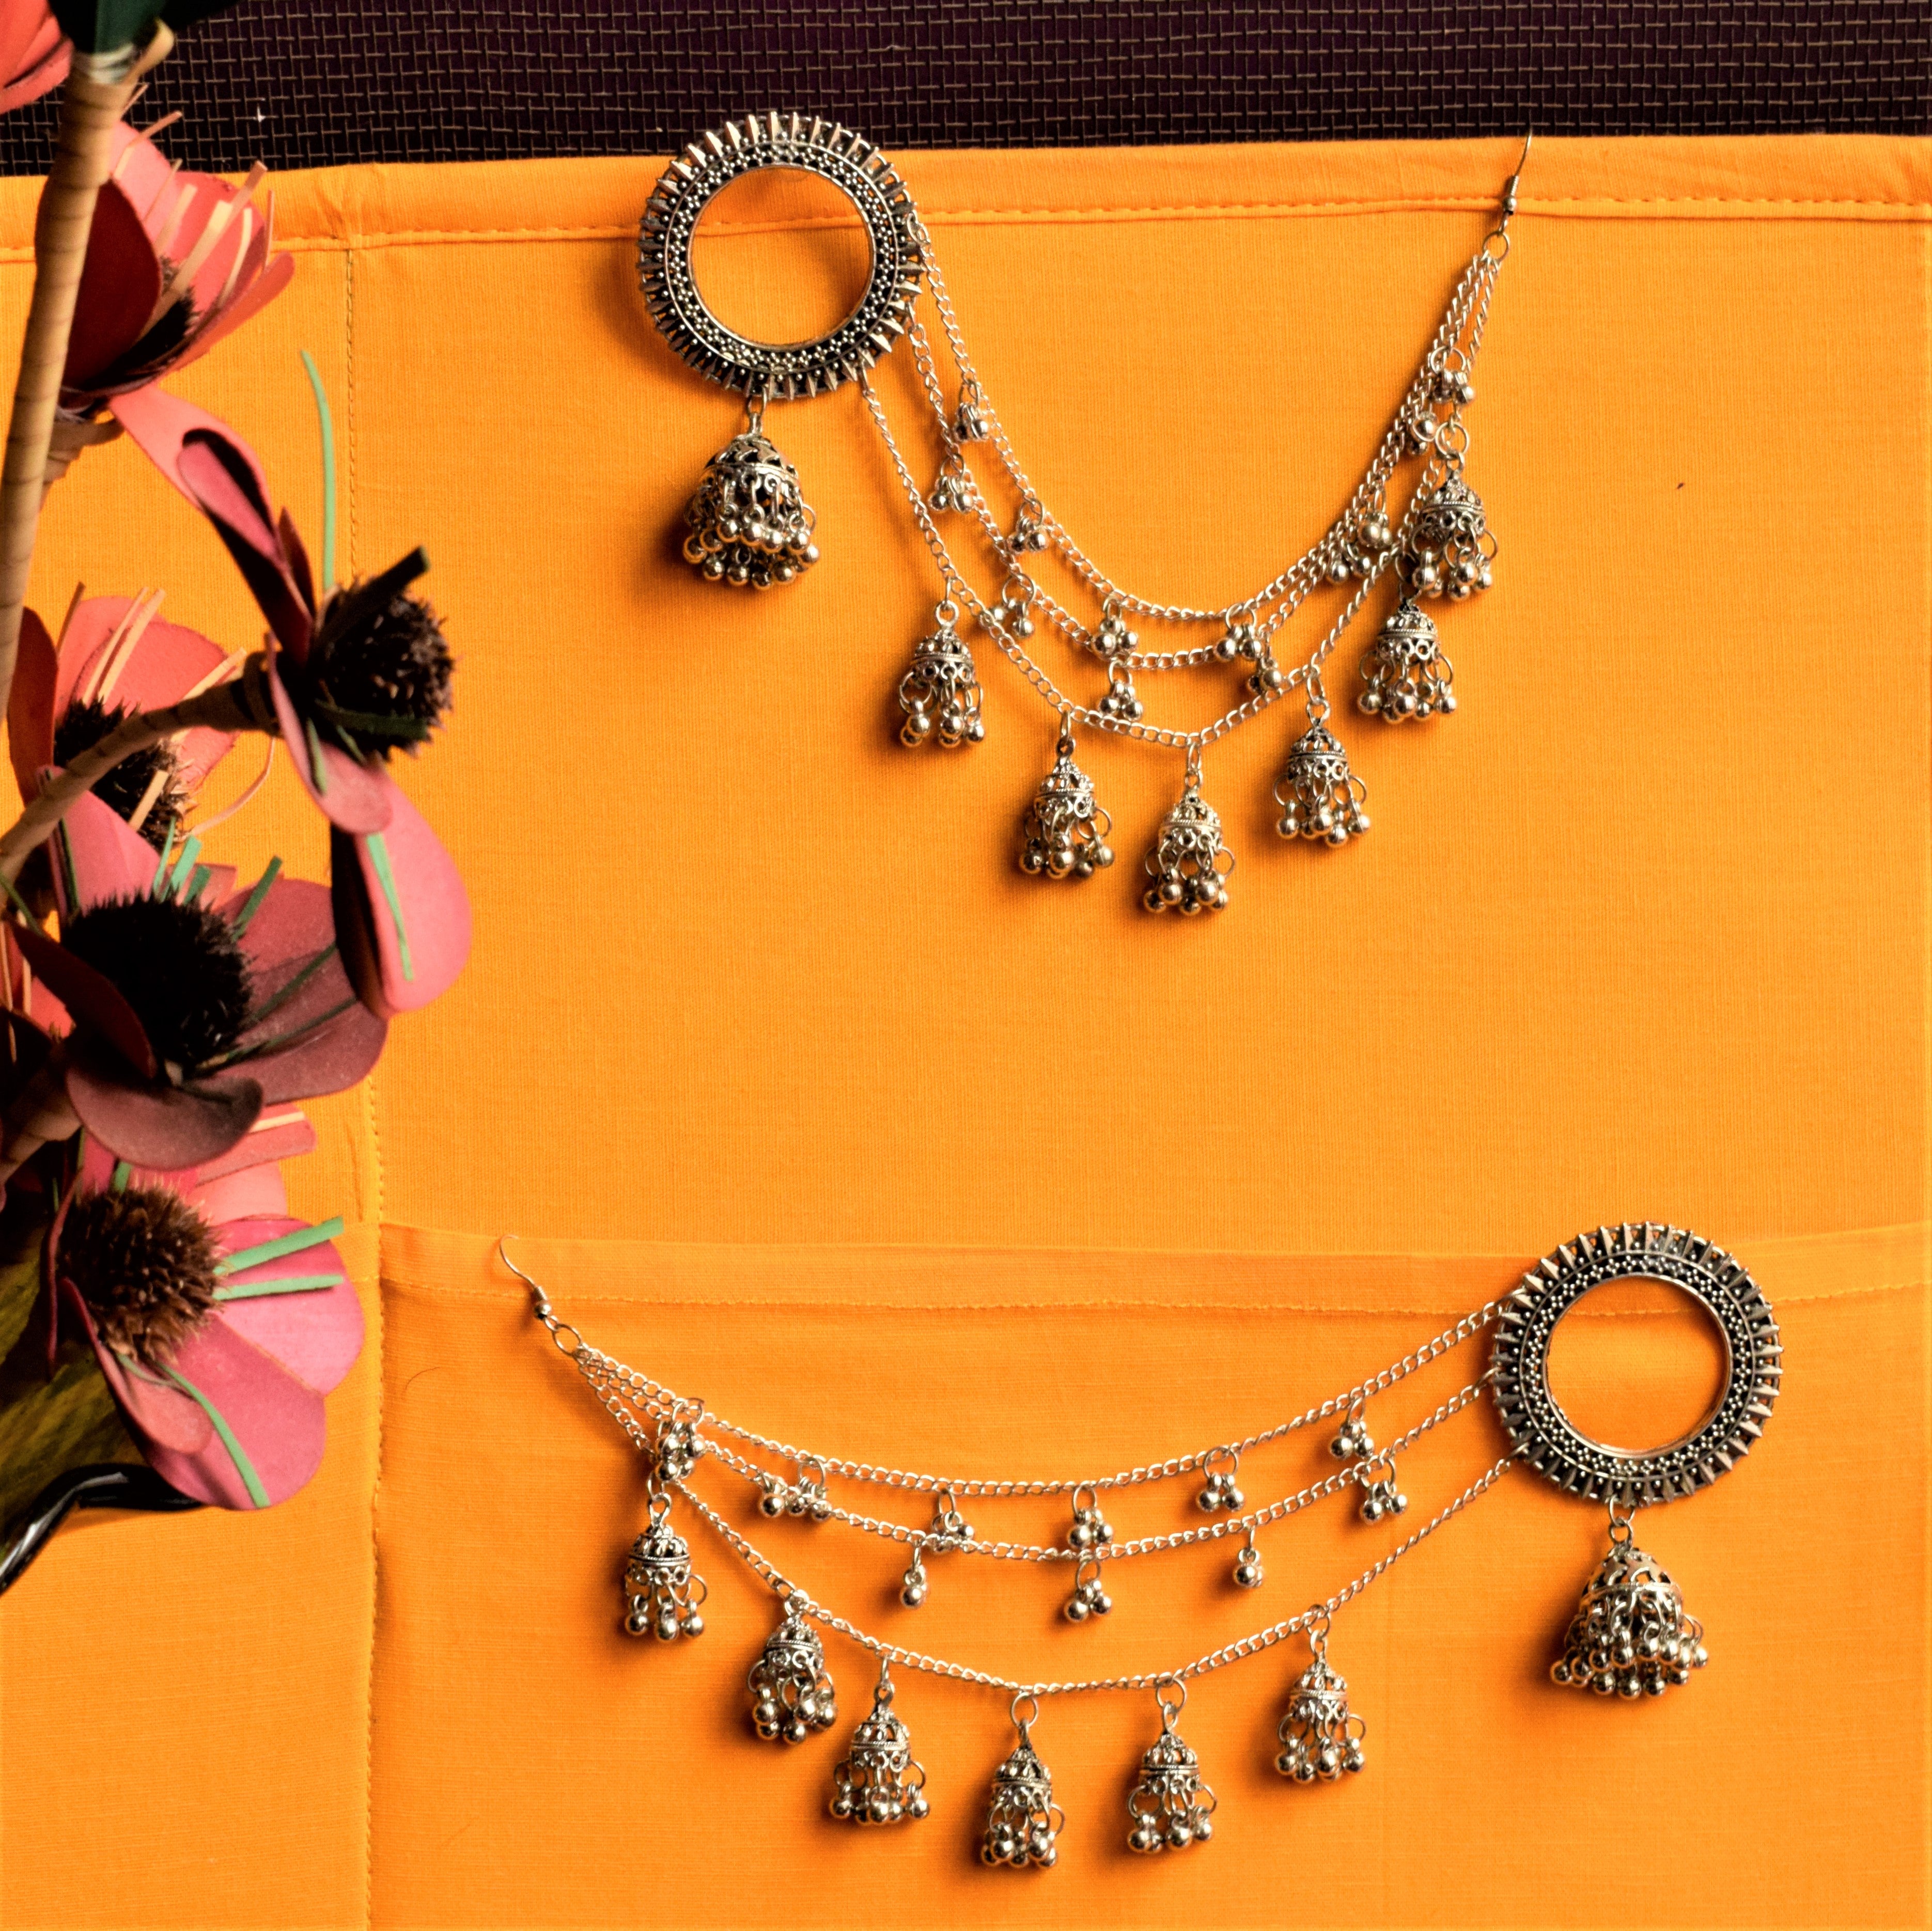 Top more than 158 bahubali earrings with necklace super hot